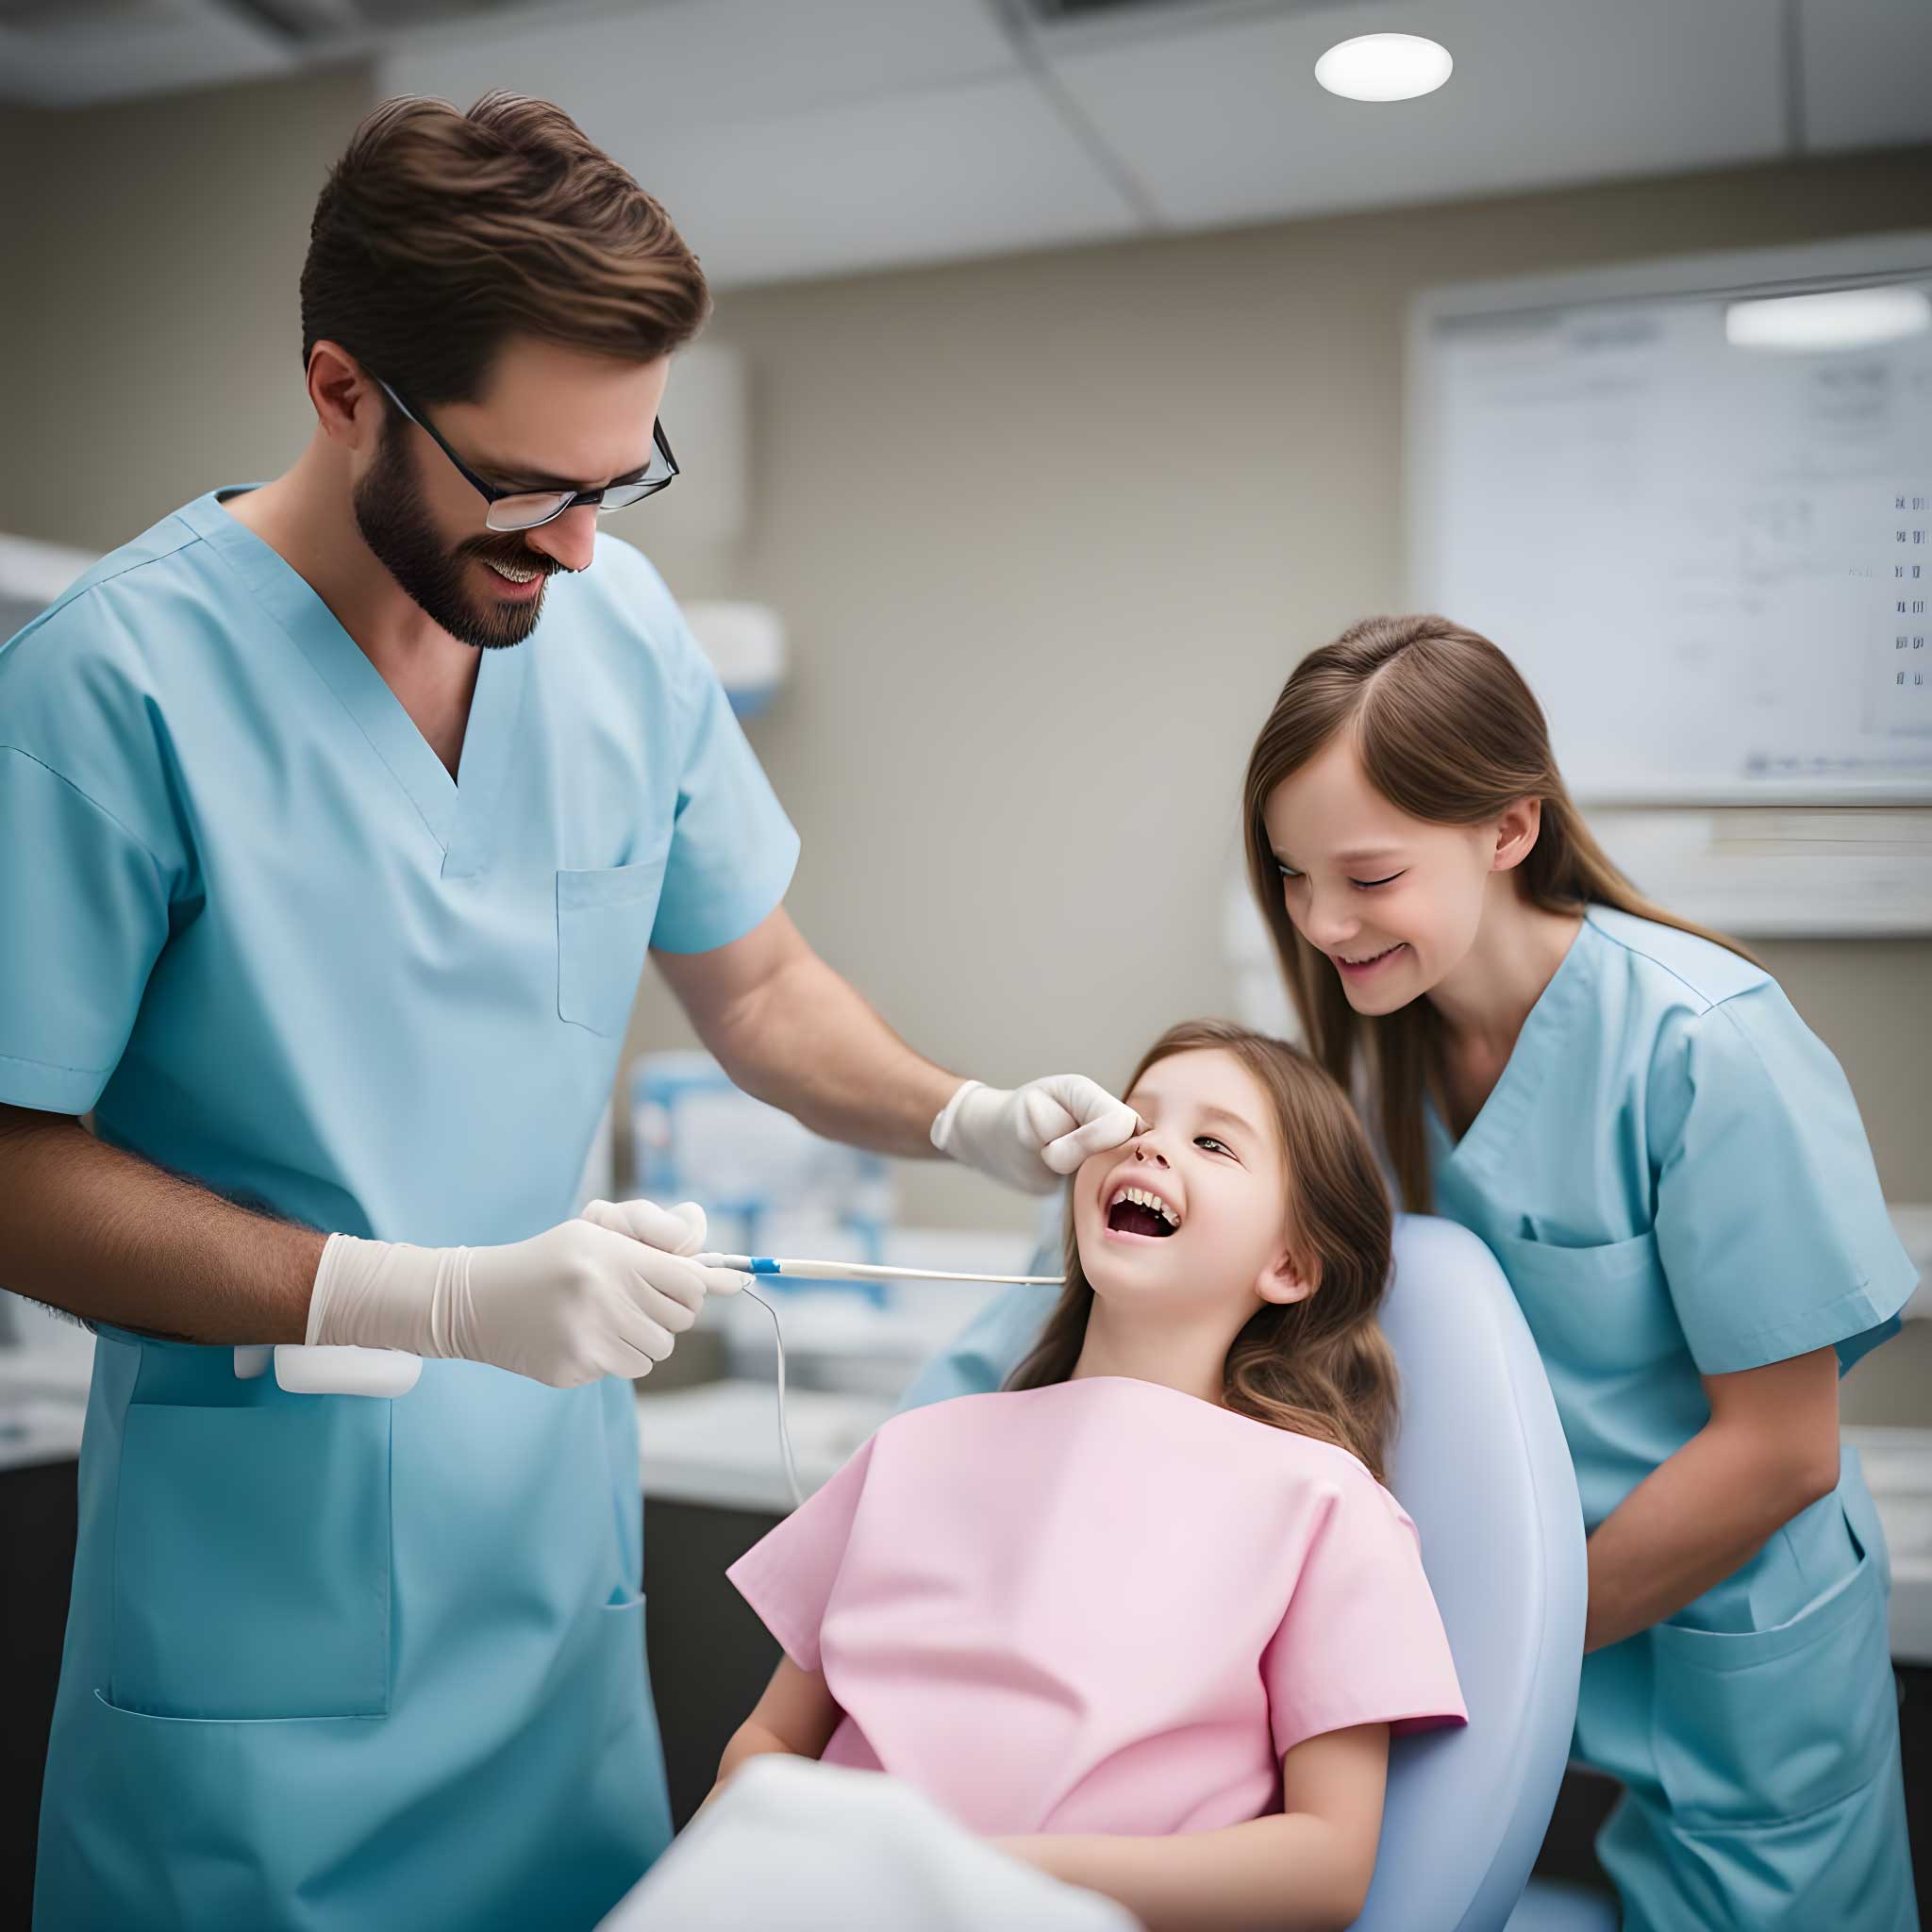 Children’s Fear Of Separation From Parents When Visiting The Dentist